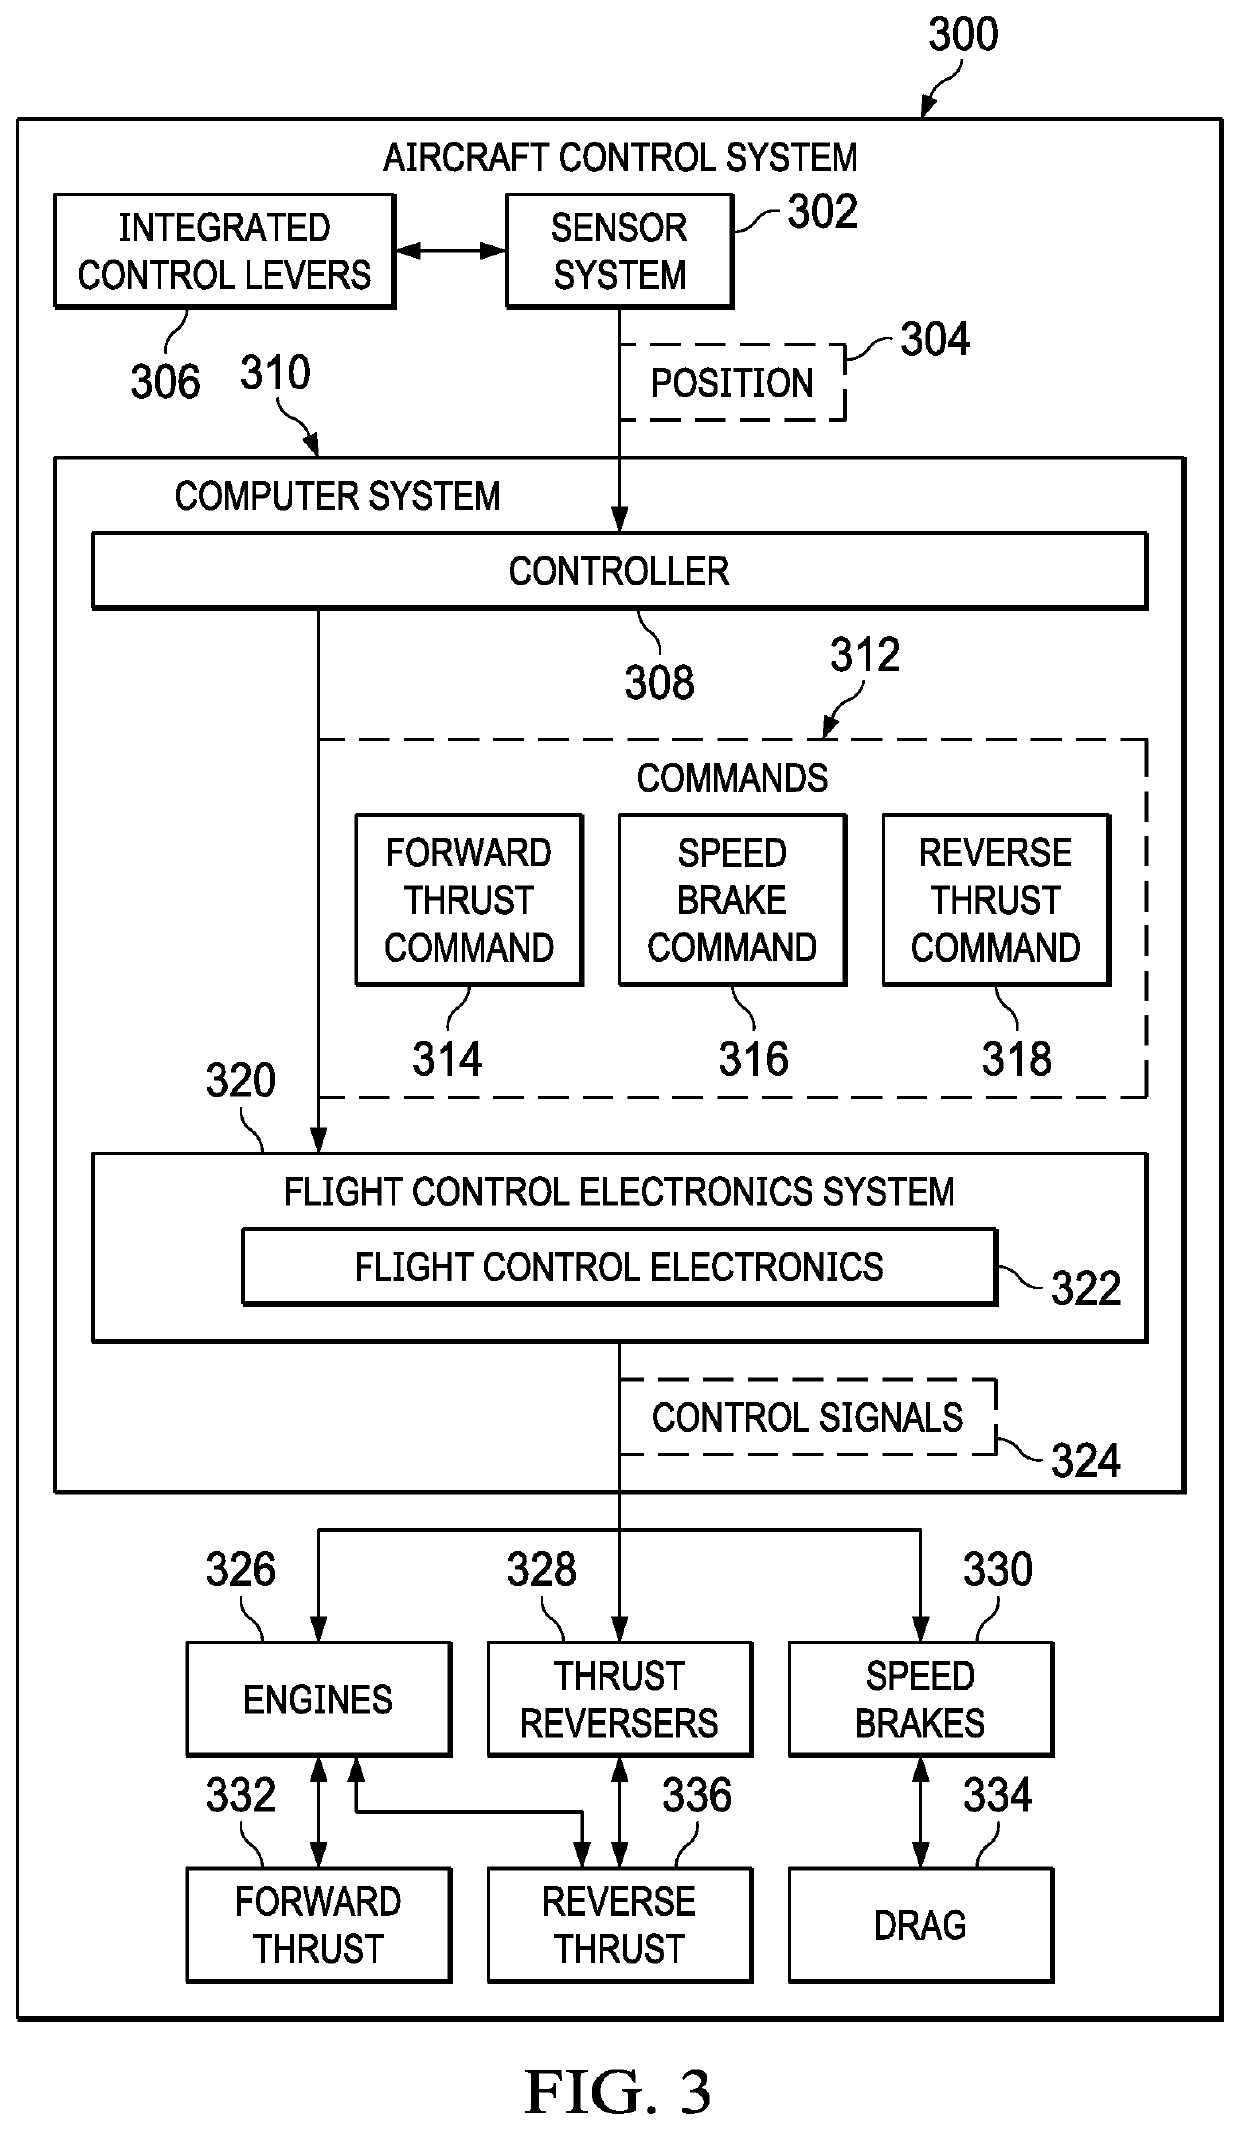 Aircraft movement control system